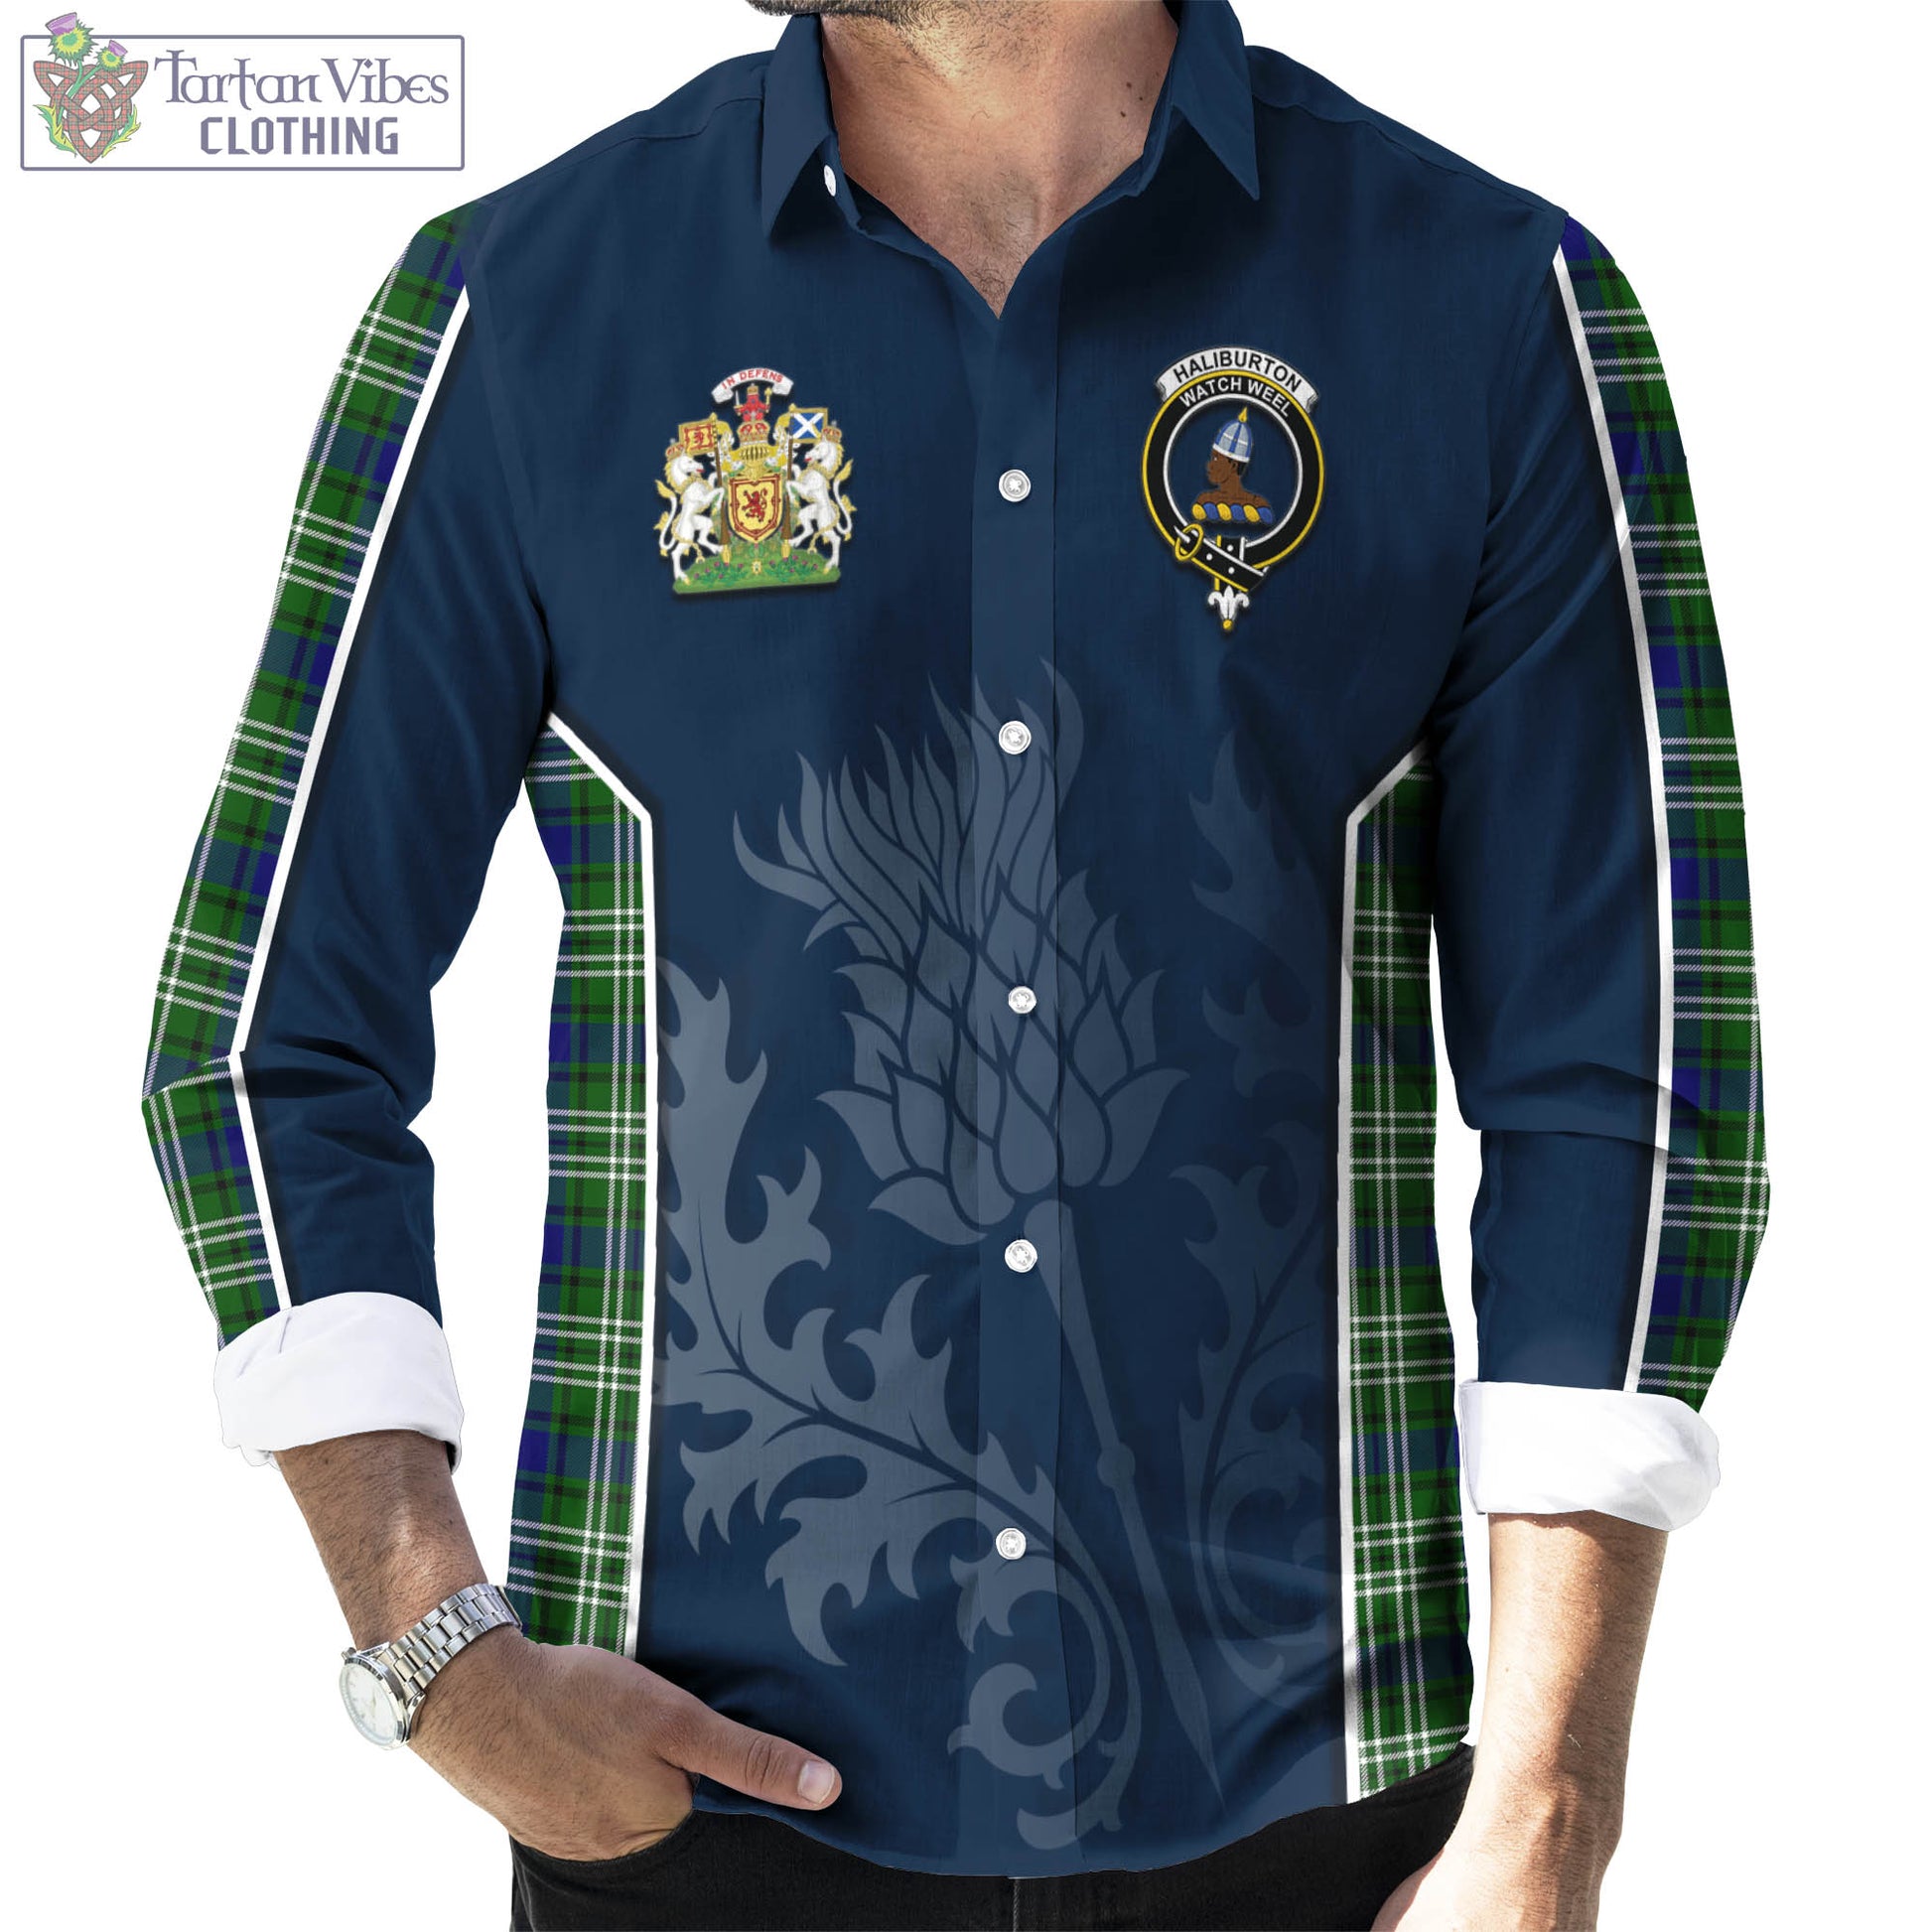 Tartan Vibes Clothing Haliburton Tartan Long Sleeve Button Up Shirt with Family Crest and Scottish Thistle Vibes Sport Style